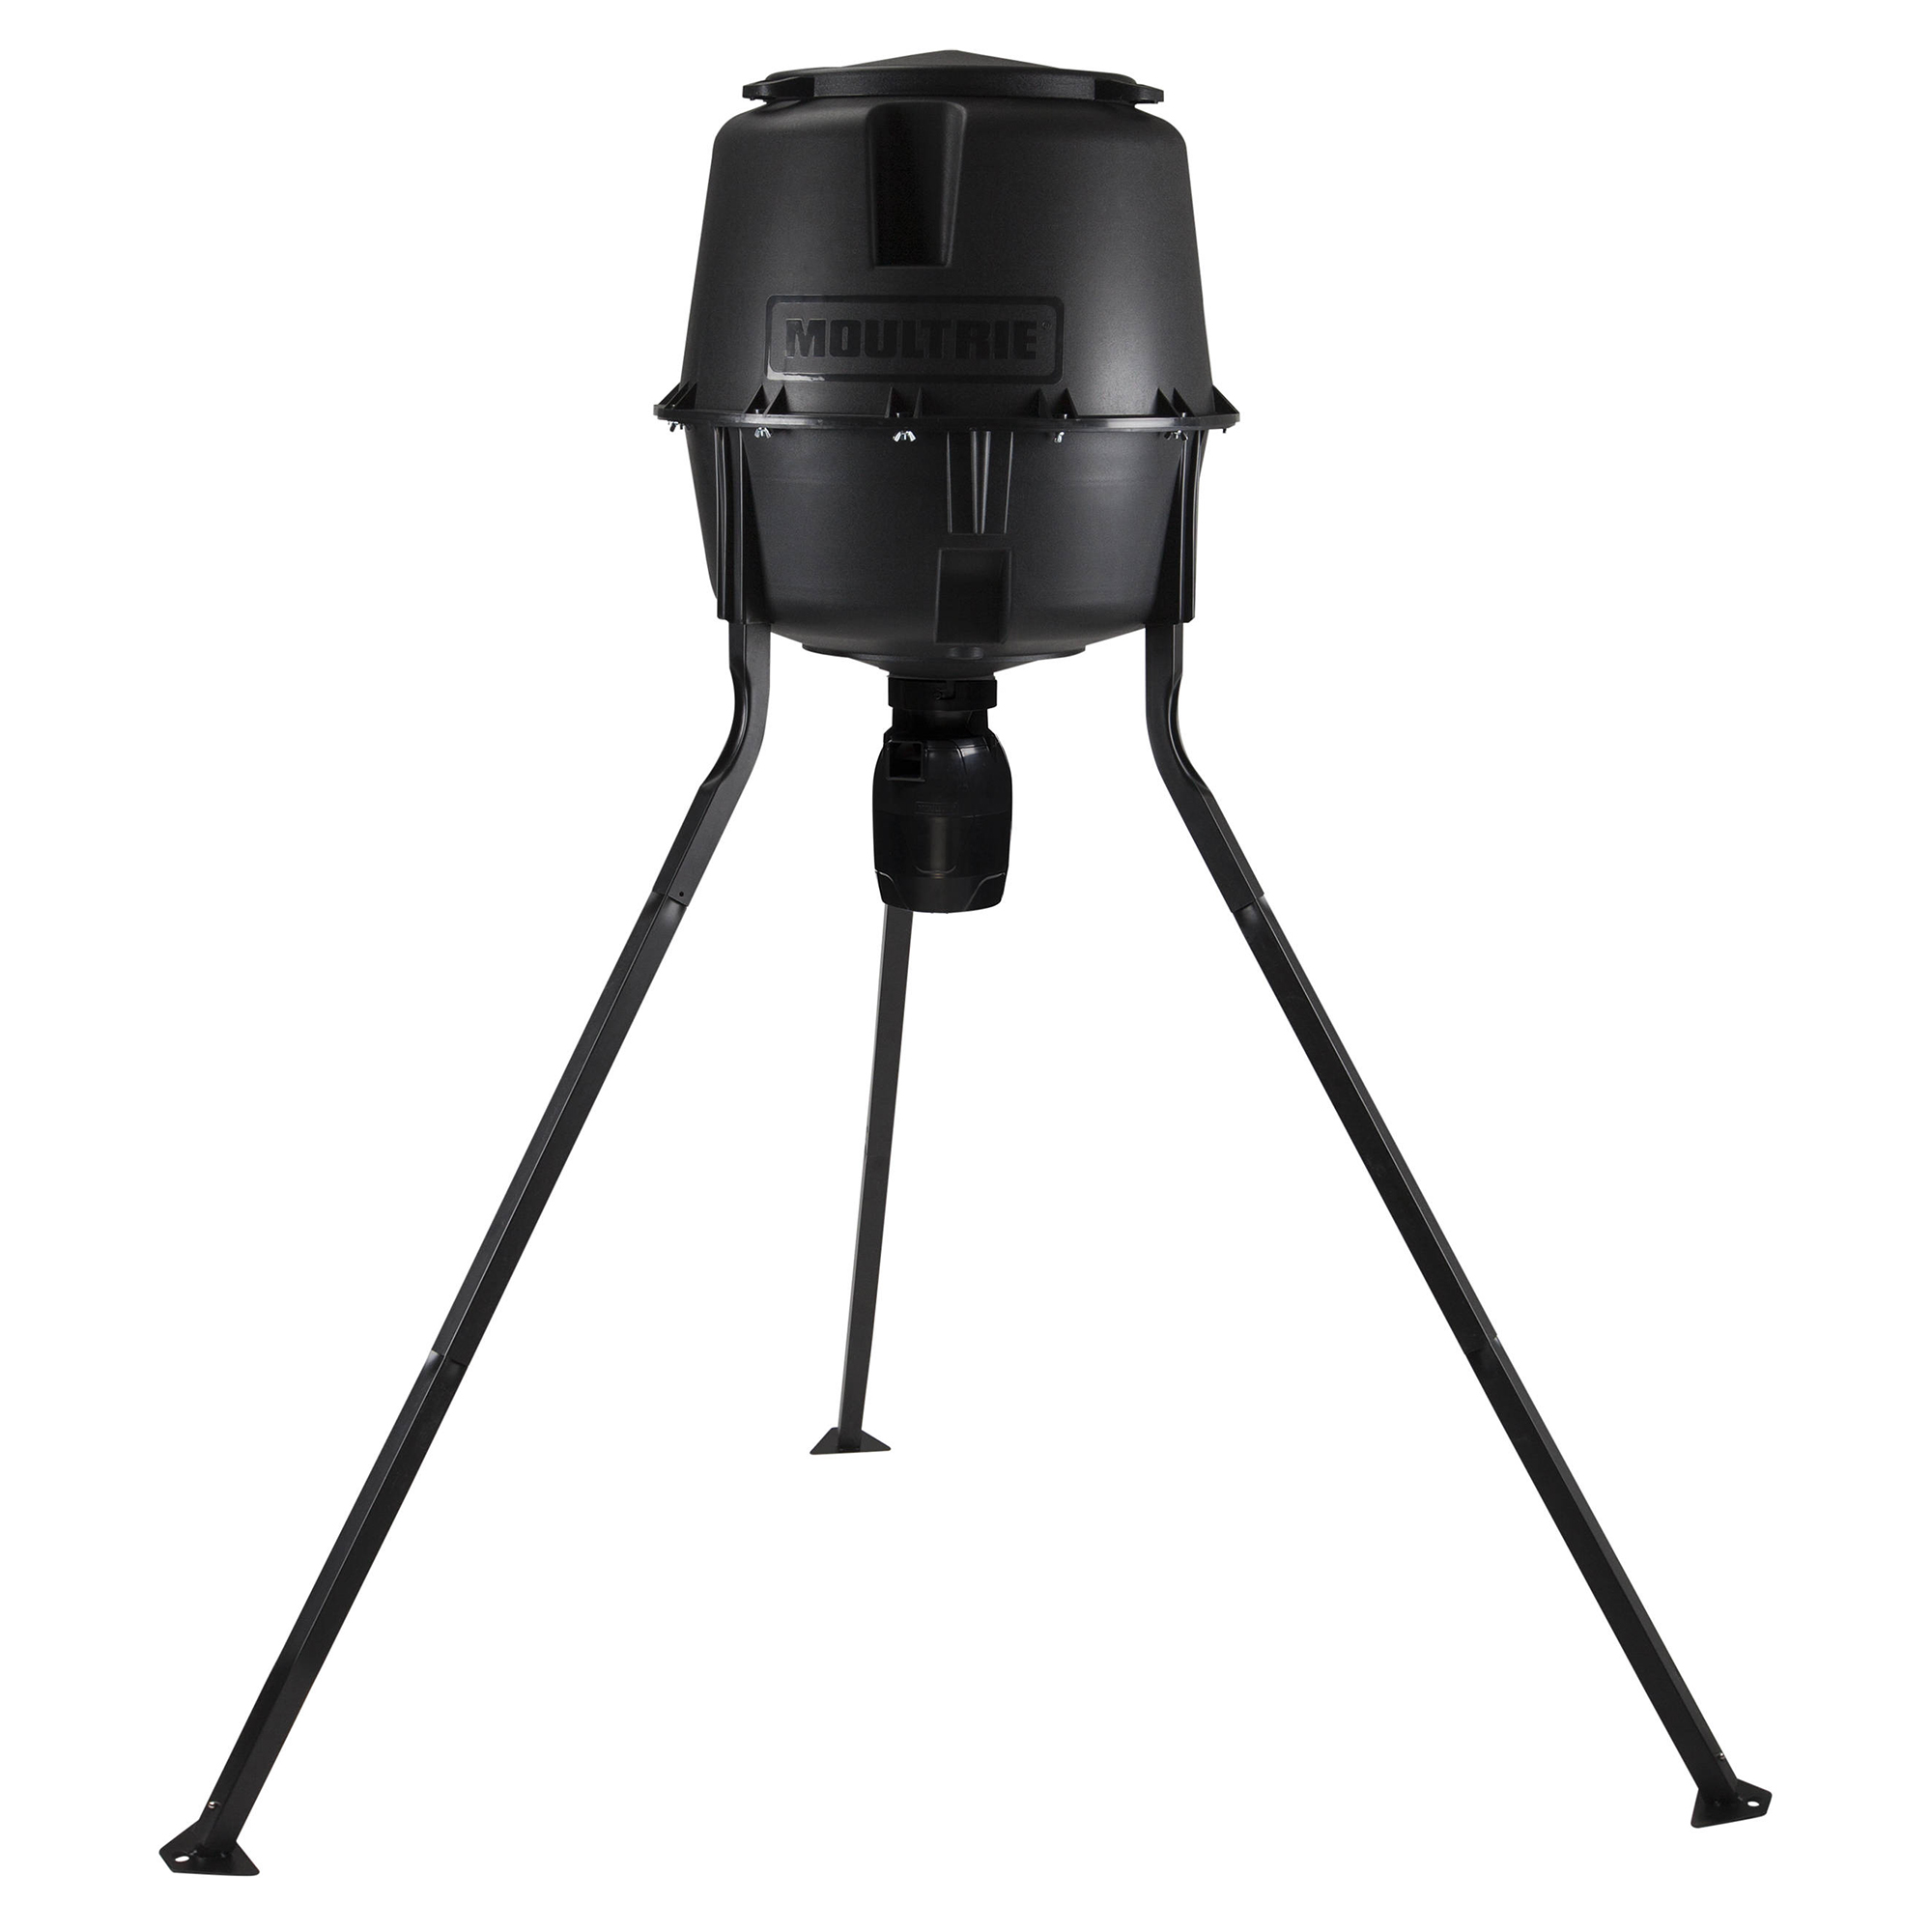 moultrie feeder manual